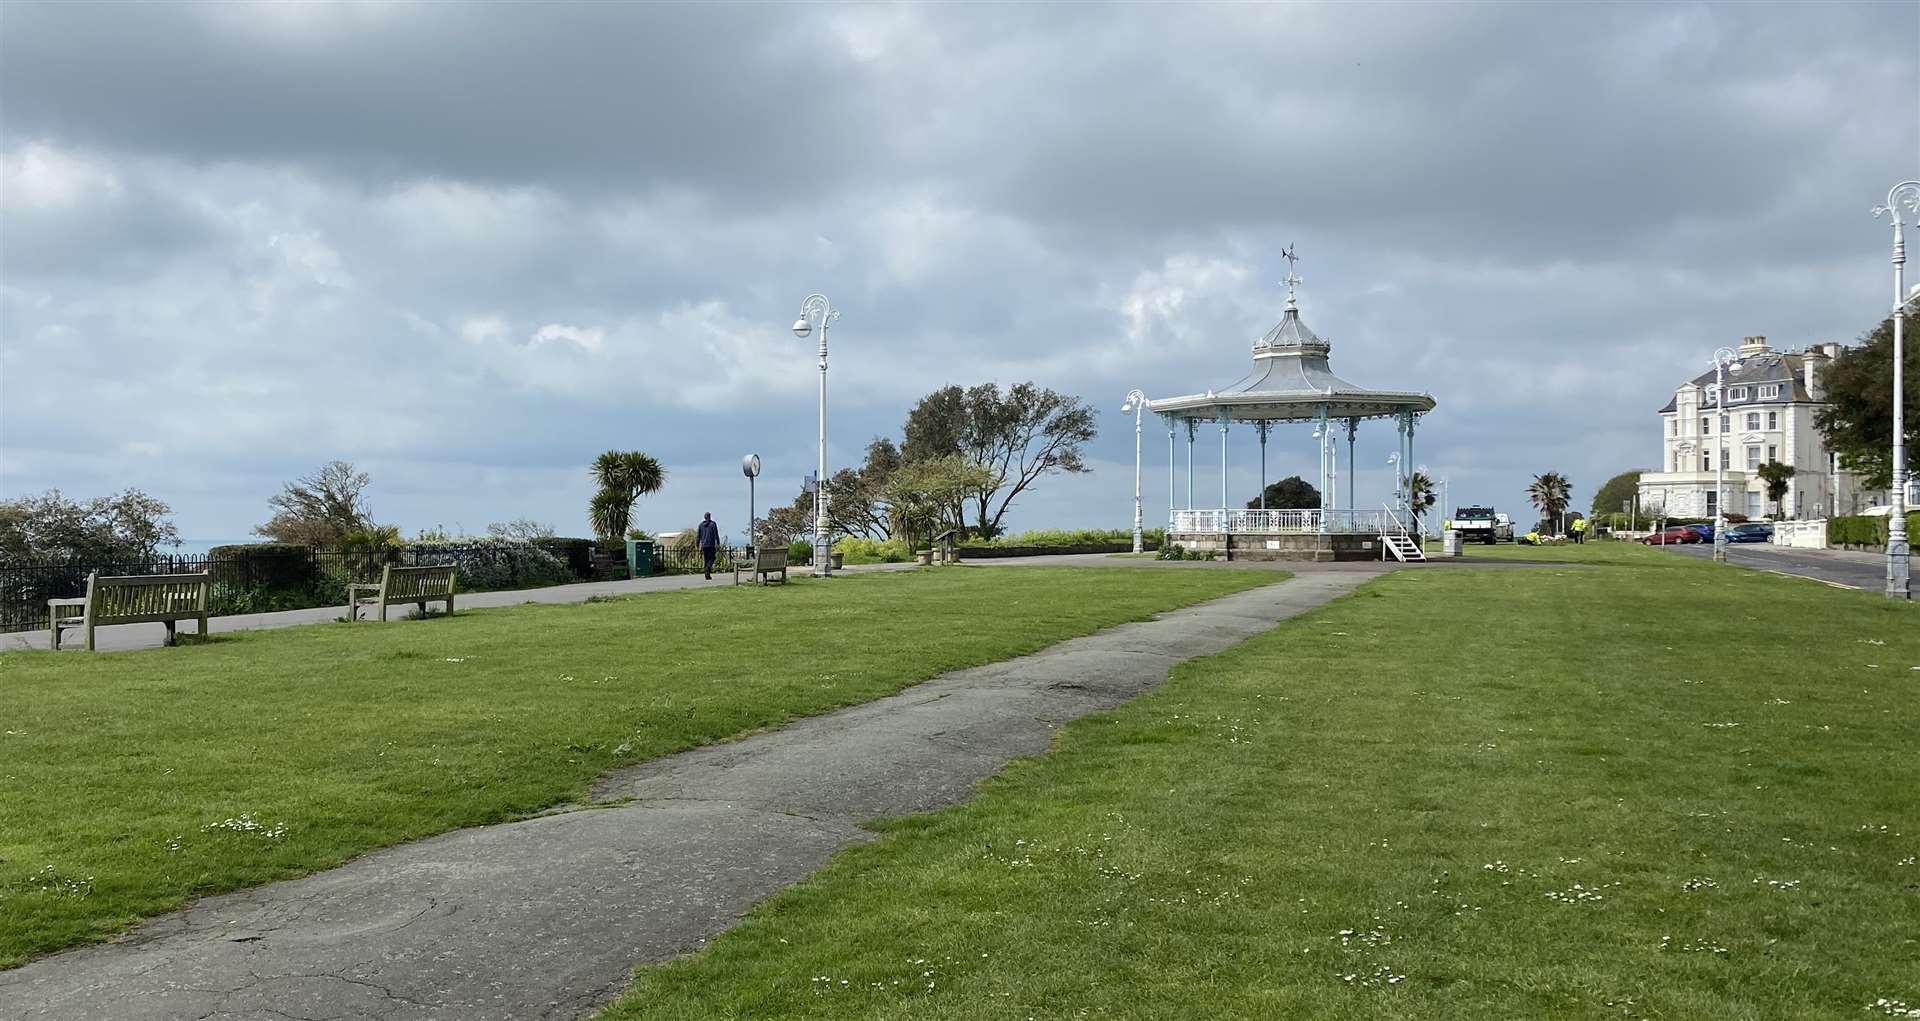 A man and his dog were attacked on The Leas in Folkestone